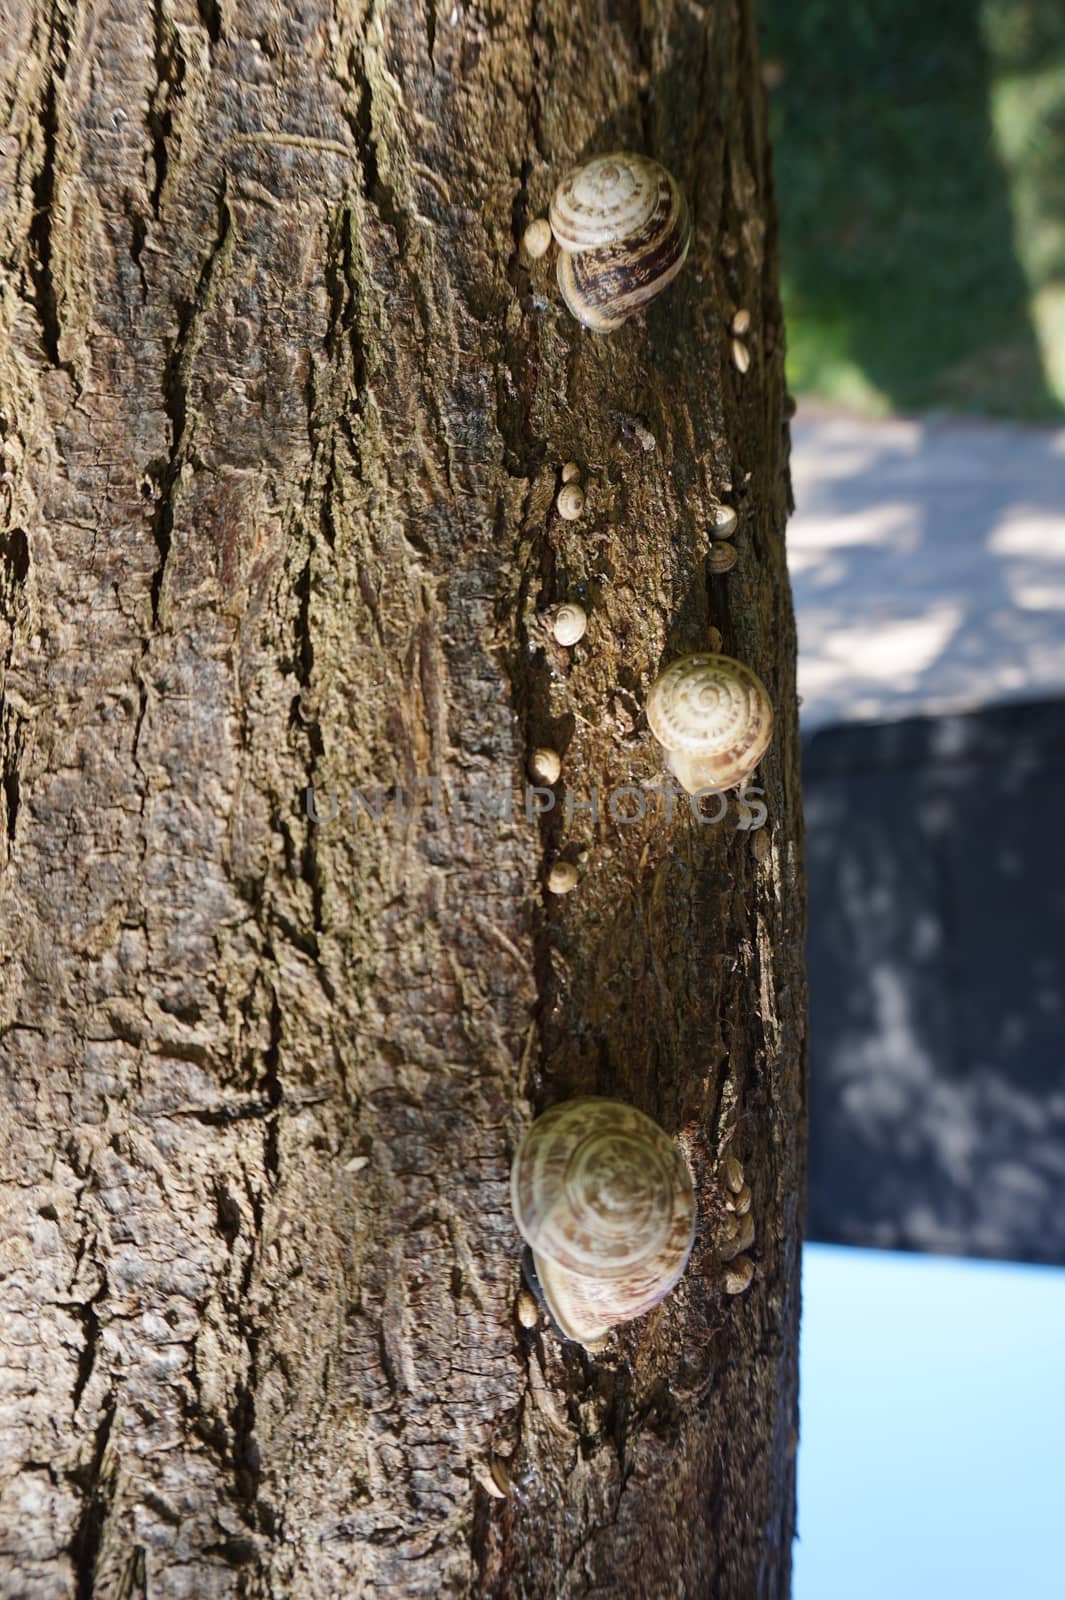 snail sitting on a tree on a Sunny summer day by claire_lucia